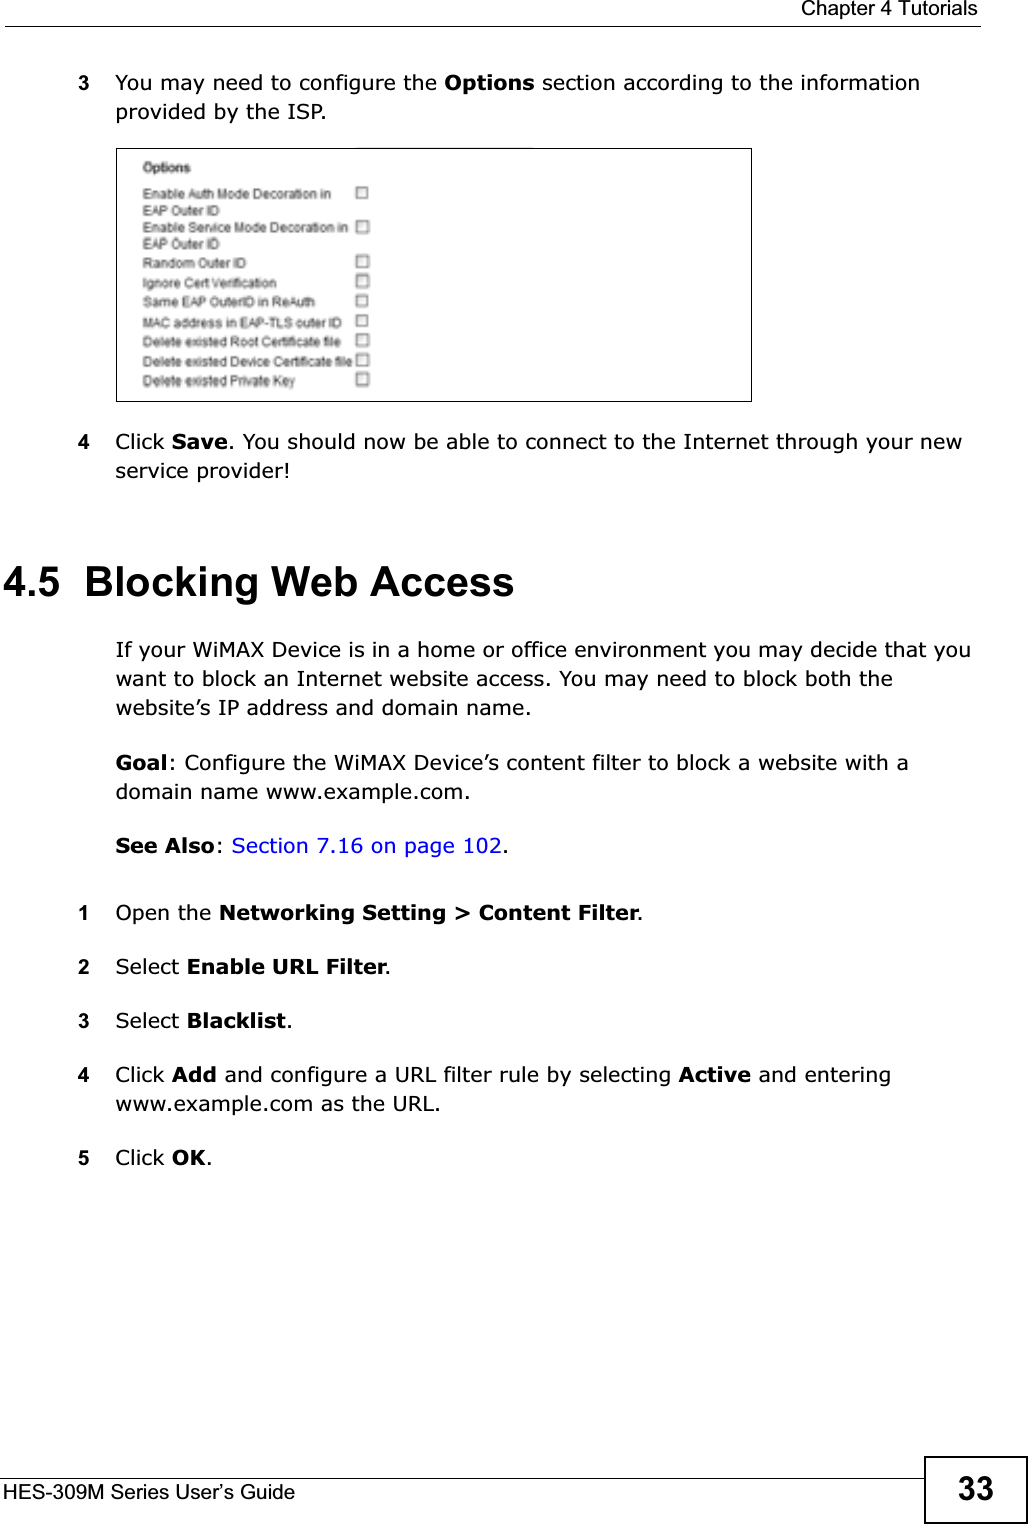  Chapter 4 TutorialsHES-309M Series User’s Guide 333You may need to configure the Options section according to the information provided by the ISP.4Click Save. You should now be able to connect to the Internet through your new service provider!4.5  Blocking Web AccessIf your WiMAX Device is in a home or office environment you may decide that you want to block an Internet website access. You may need to block both the website’s IP address and domain name.Goal: Configure the WiMAX Device’s content filter to block a website with a domain name www.example.com.See Also:Section 7.16 on page 102.1Open the Networking Setting &gt; Content Filter.2Select Enable URL Filter.3Select Blacklist.4Click Add and configure a URL filter rule by selecting Active and entering www.example.com as the URL.5Click OK.